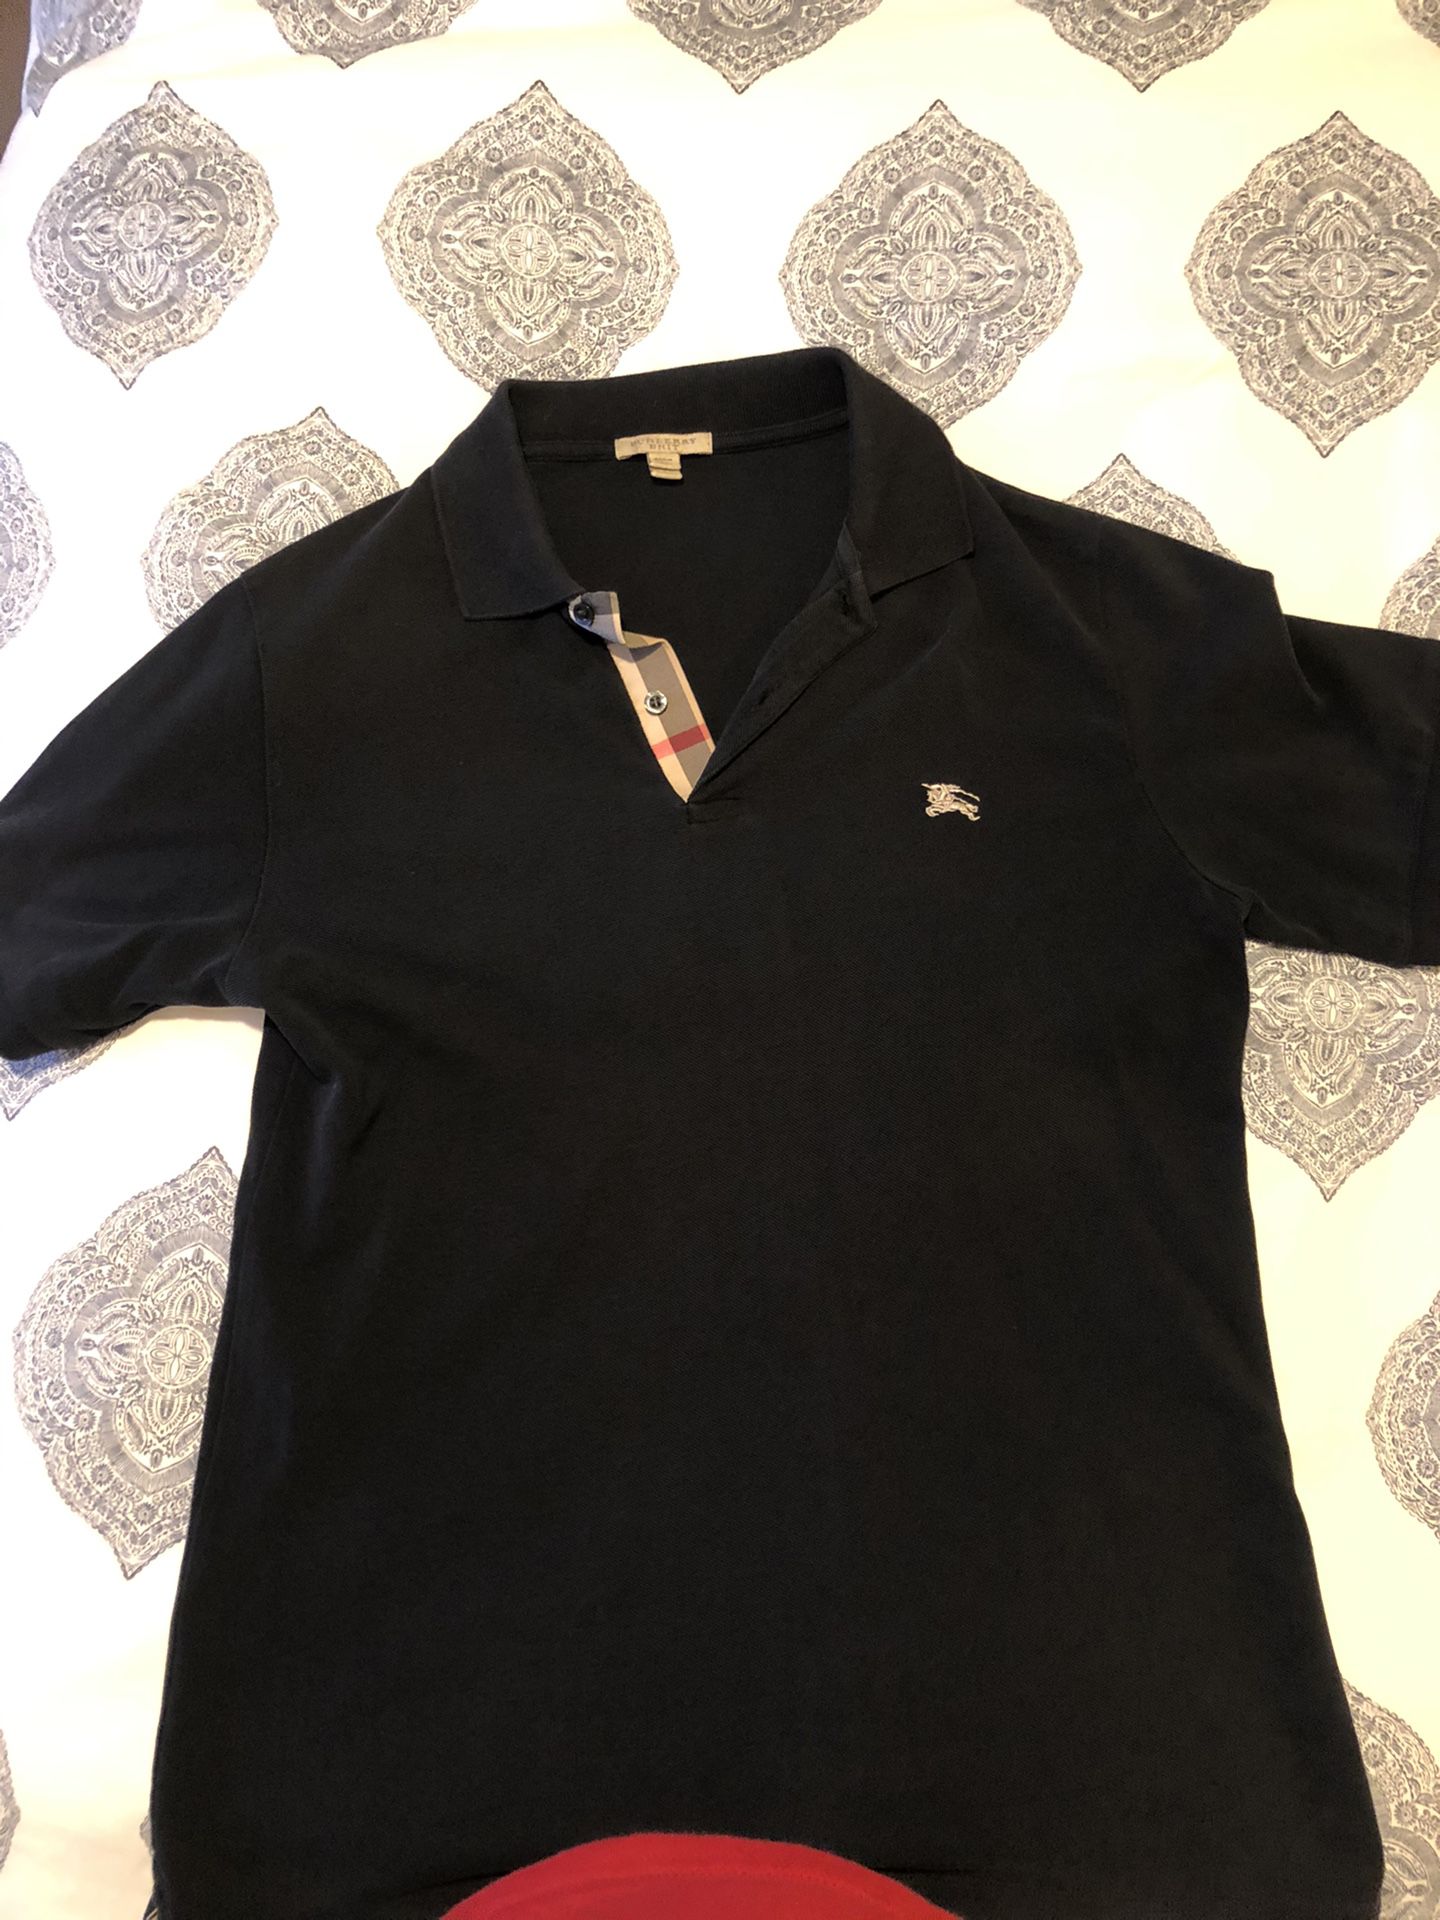 AUTHENTIC BURBERRY POLO - SMALL